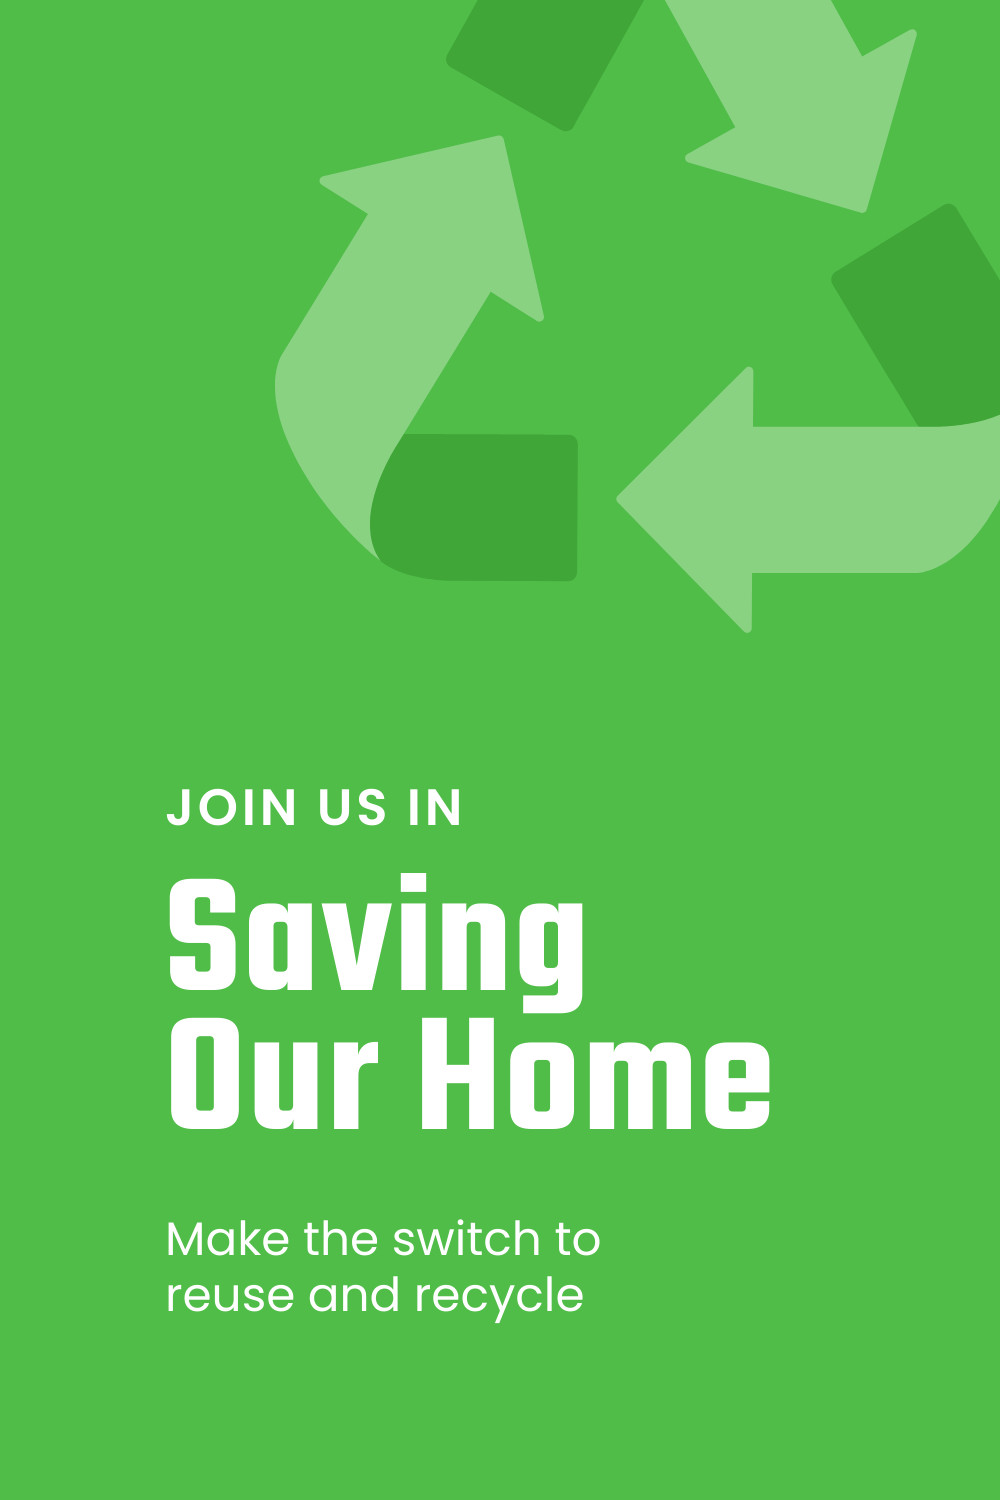 Save our Home and Recycle Earth Day